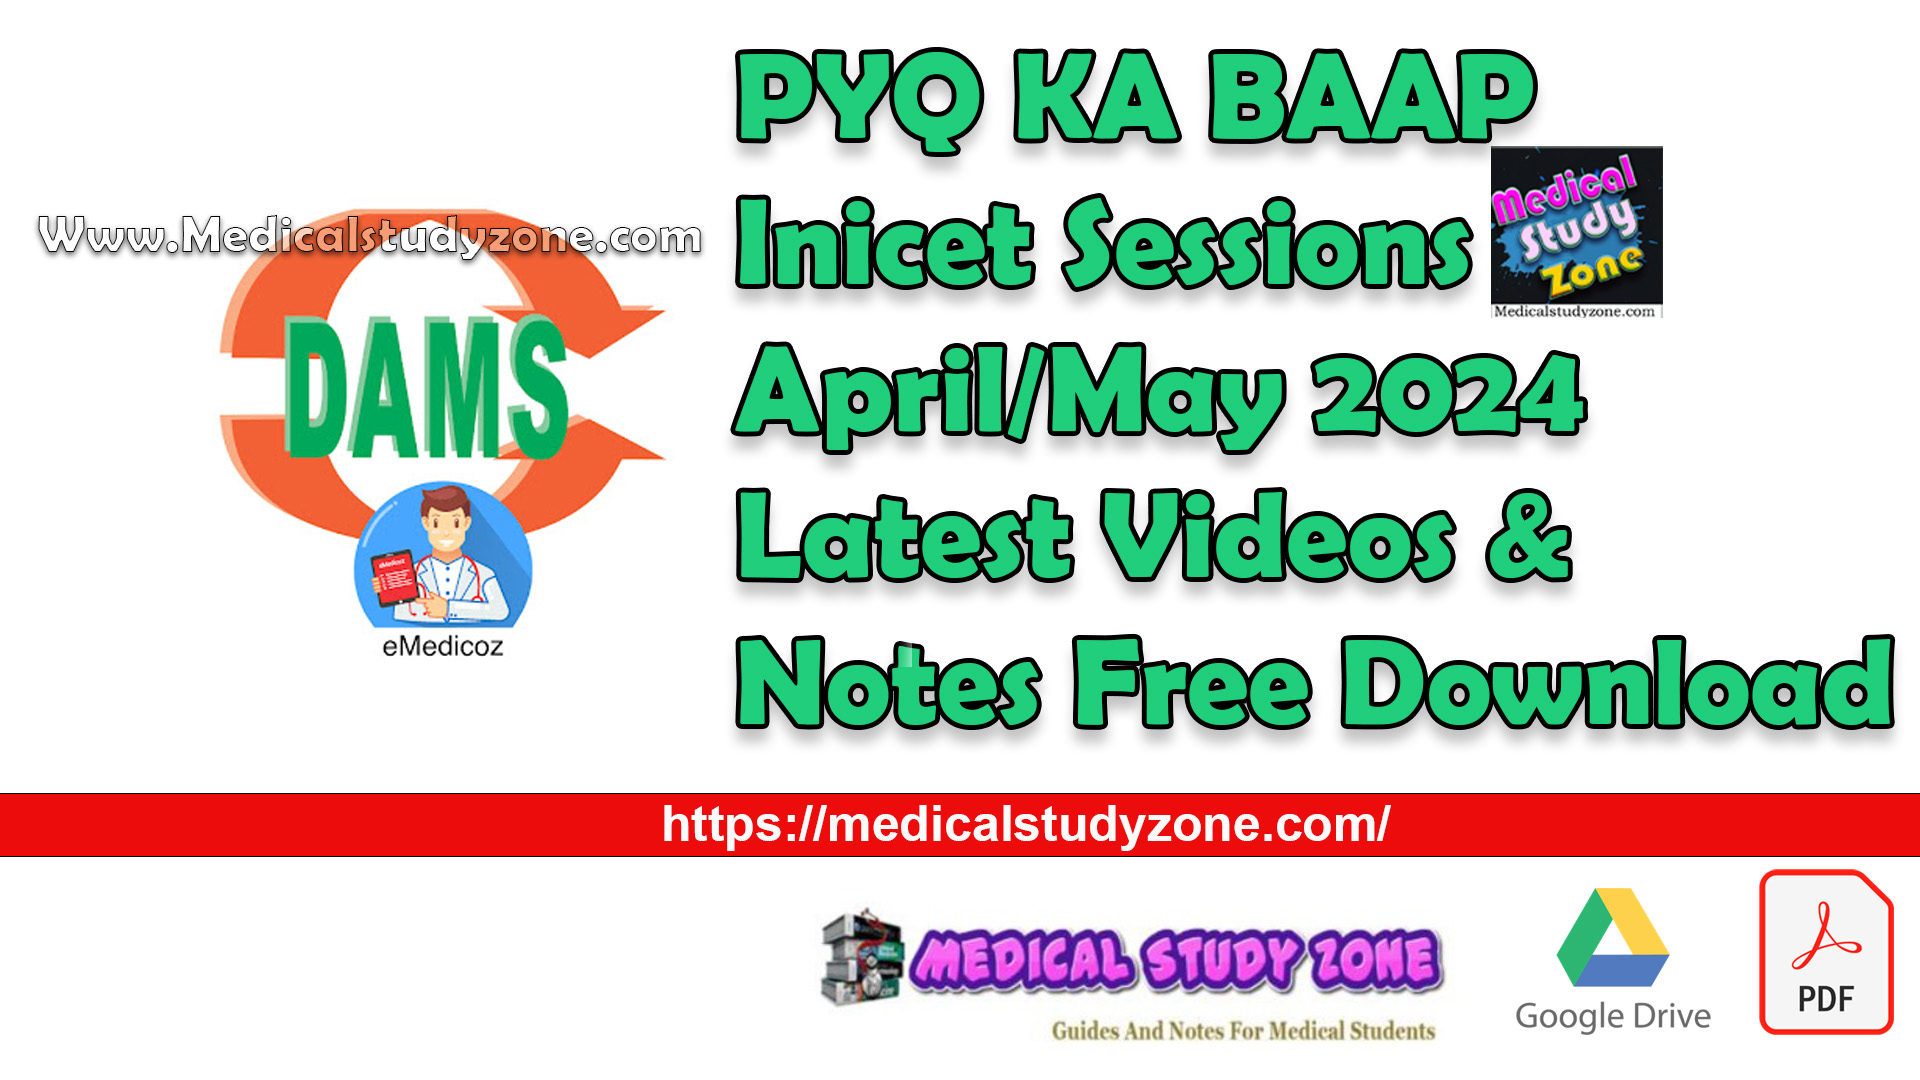 PYQ KA BAAP Inicet Sessions - April/May 2024 Latest Videos & Notes Free Download